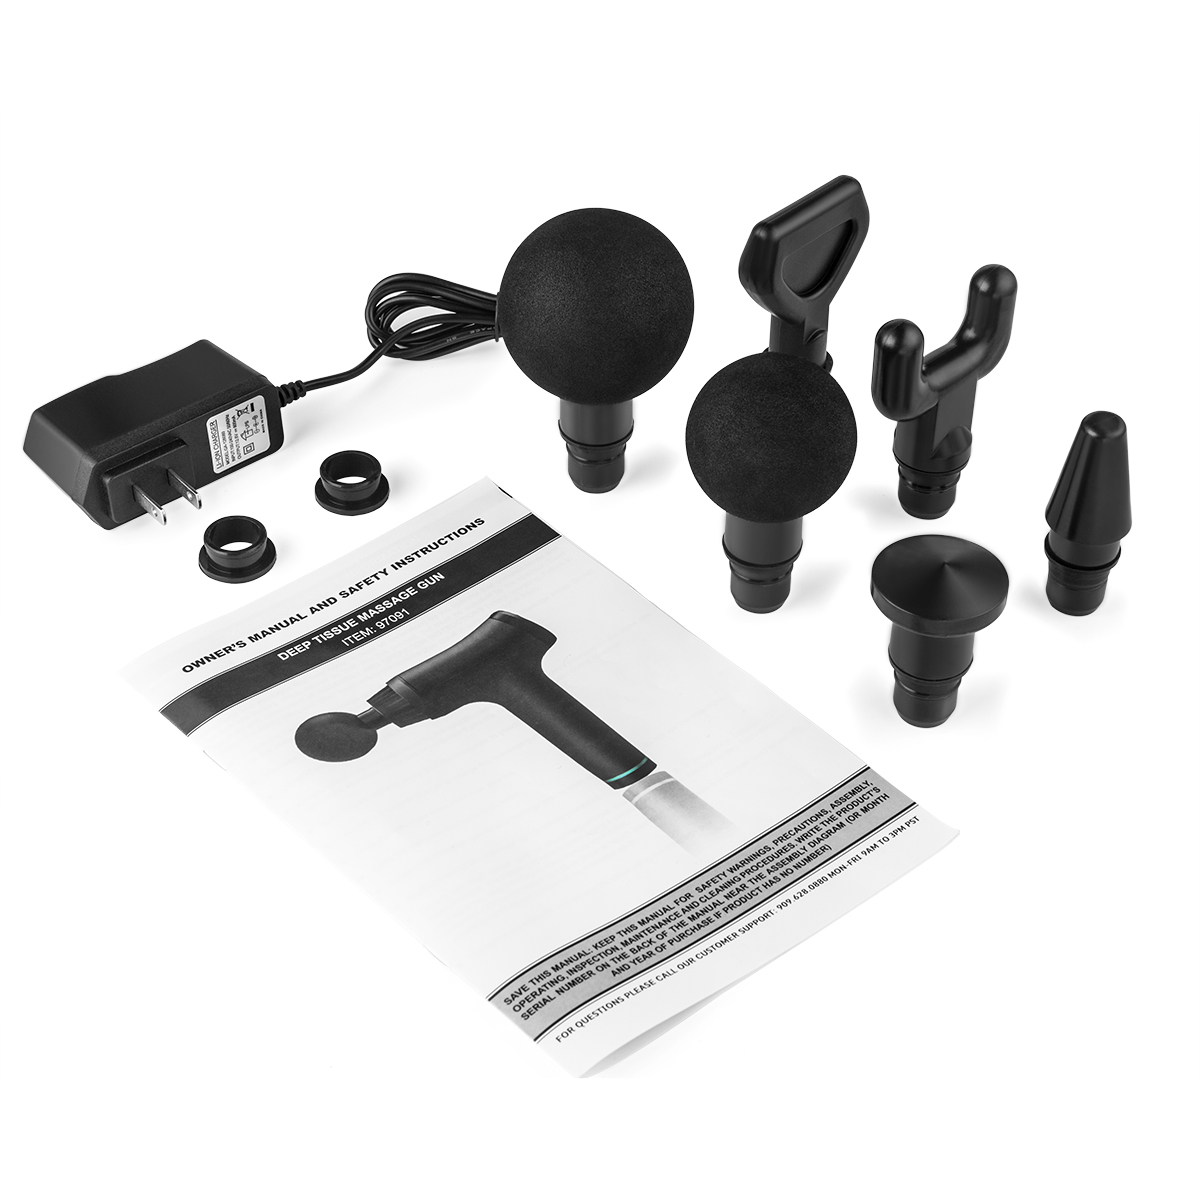 XtremepowerUS Powerful Electric Gun Cordless Percussion Massager 6 Massage Heads LCD Display w/ Carrying Case - image 3 of 6